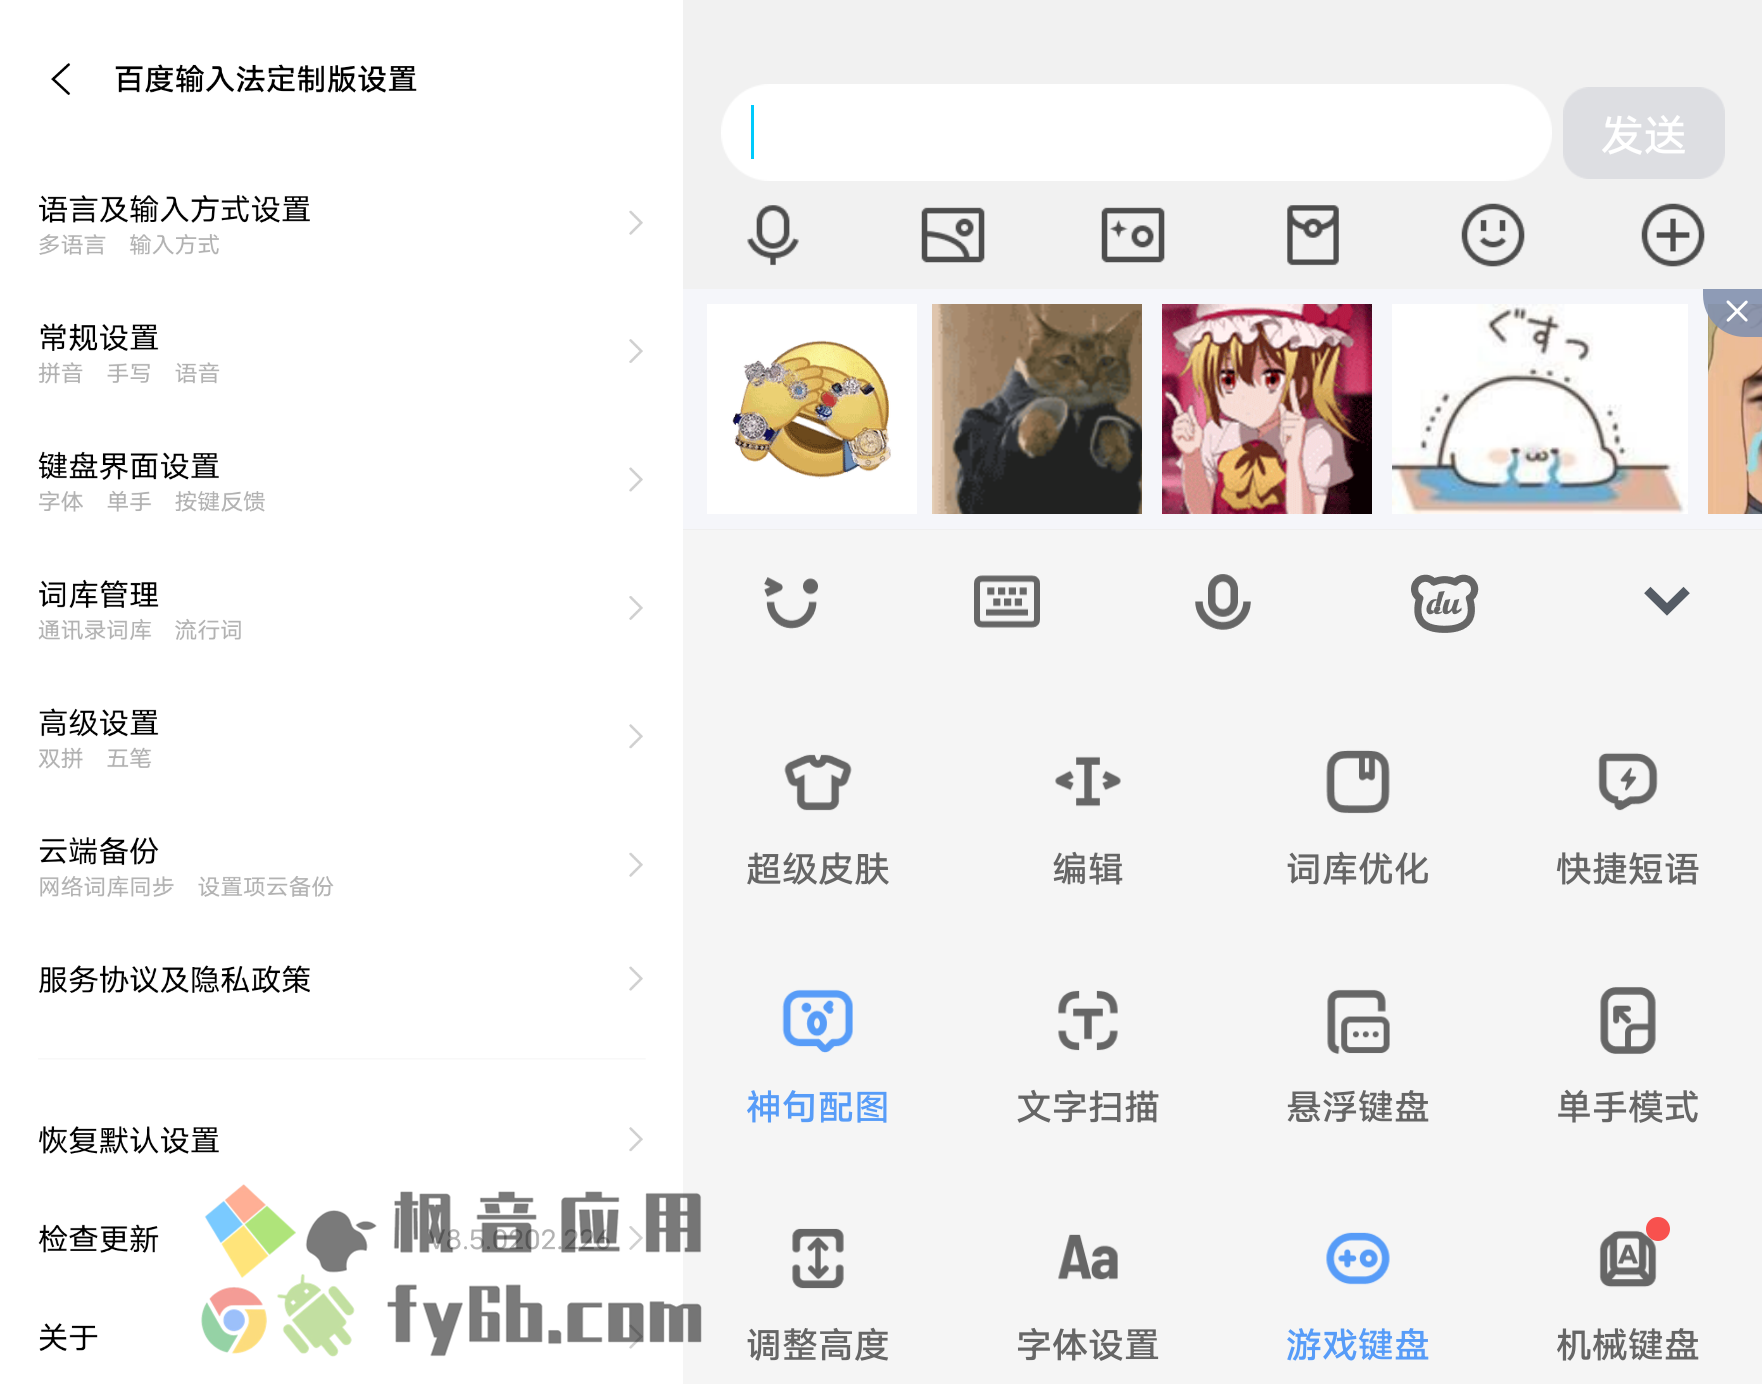 Android 百度输入法_v10.6.66.151 小米版